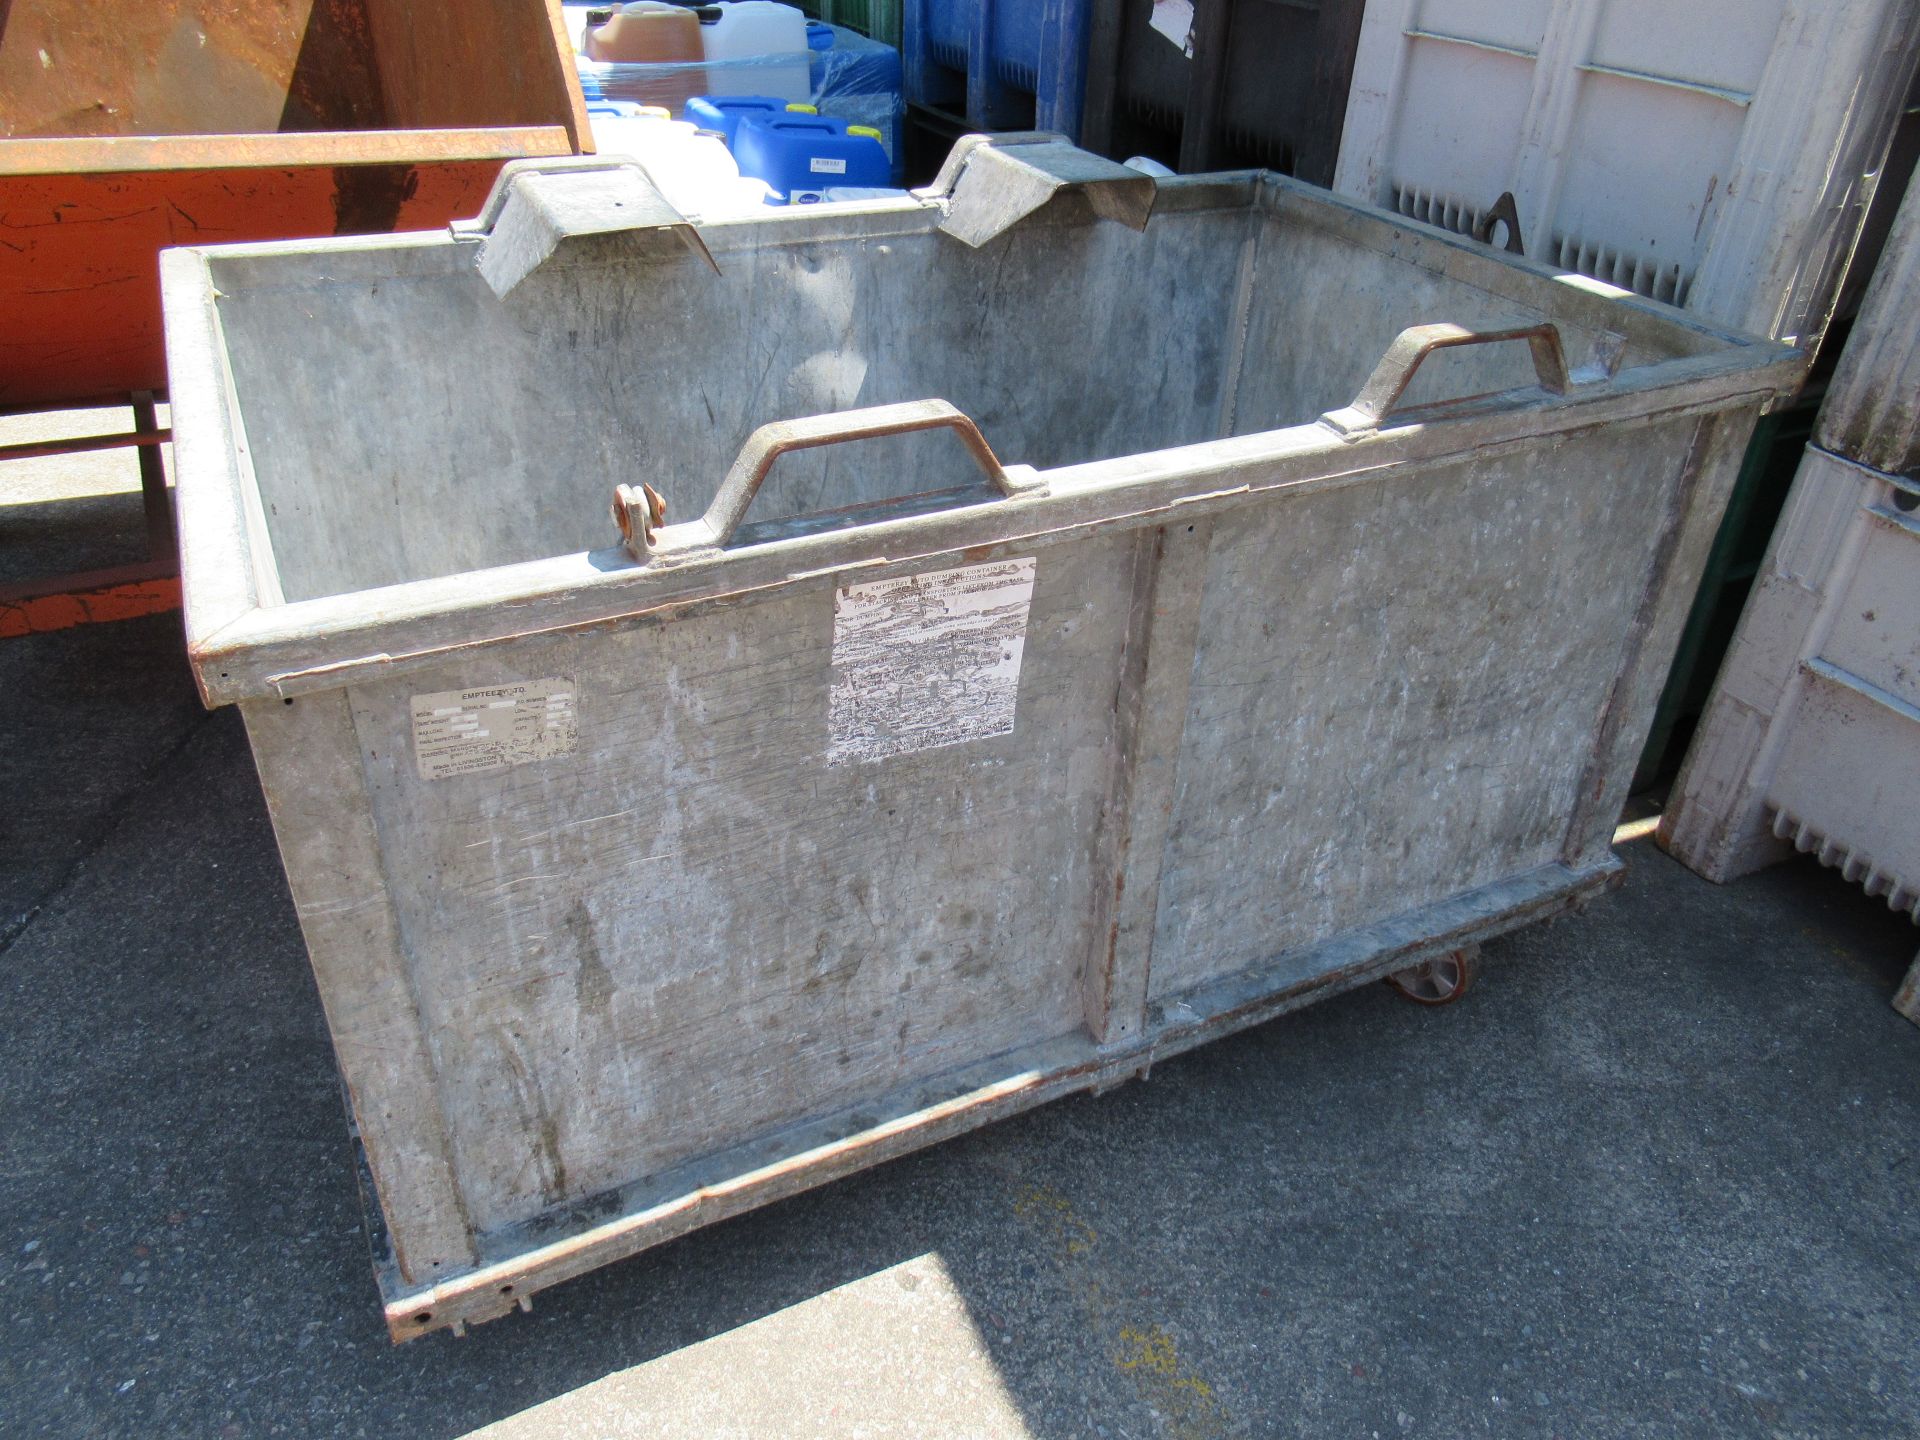 4 Galvanised mobile four wheel waste bins, 1600 x 950 x 750mm high with fold down draw bar - Image 4 of 9